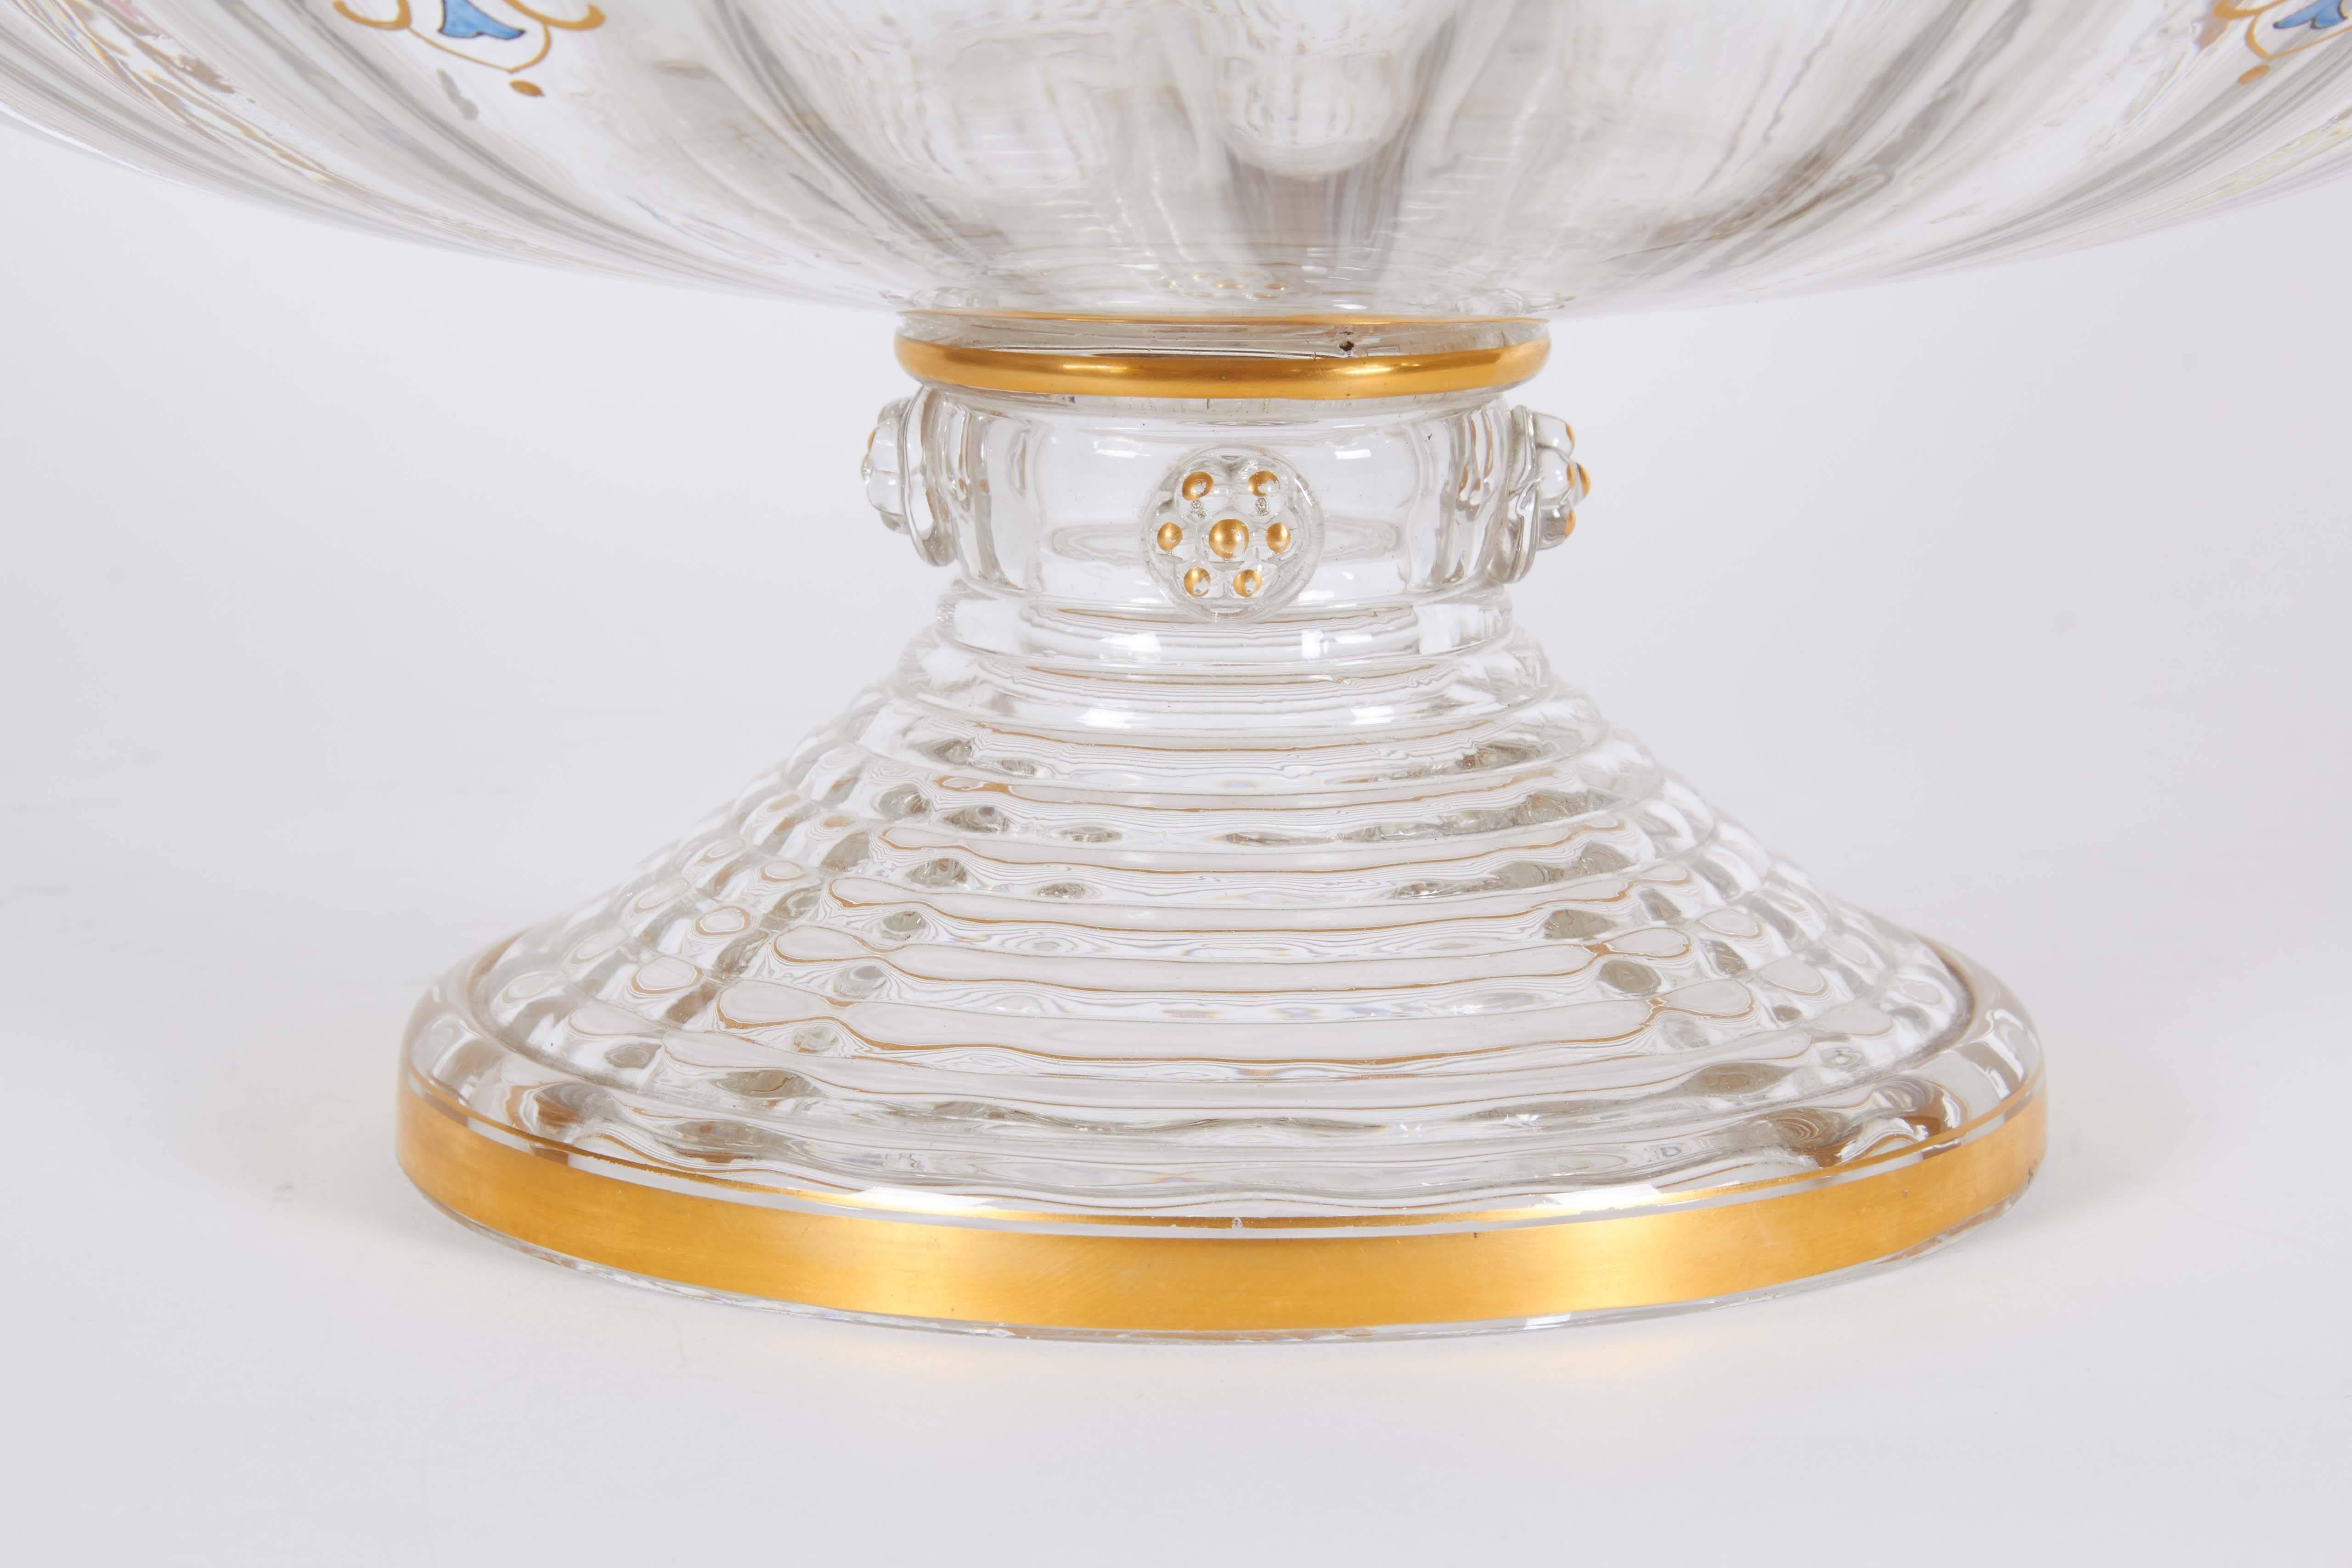 Early 20th Century Art Nouveau Centerpiece Punch Bowl Set with Blown Glass under Tray and 11 Cups